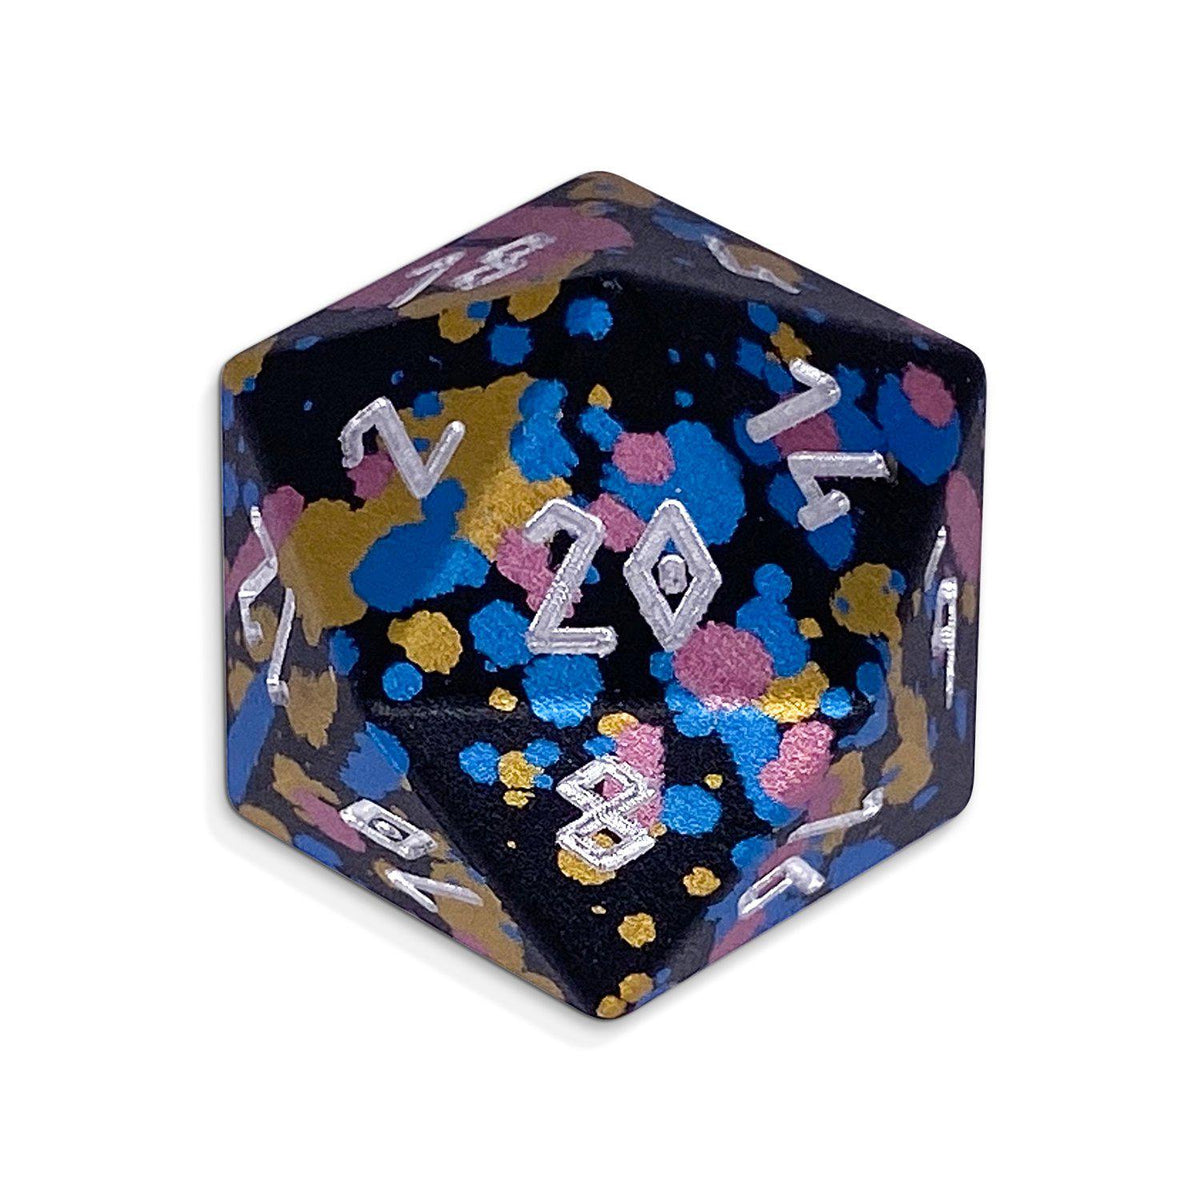 Single Wondrous Dice® D20 in That 70s Die by Norse Foundry 6063 Aircraft Grade Aluminum - NOR 02422